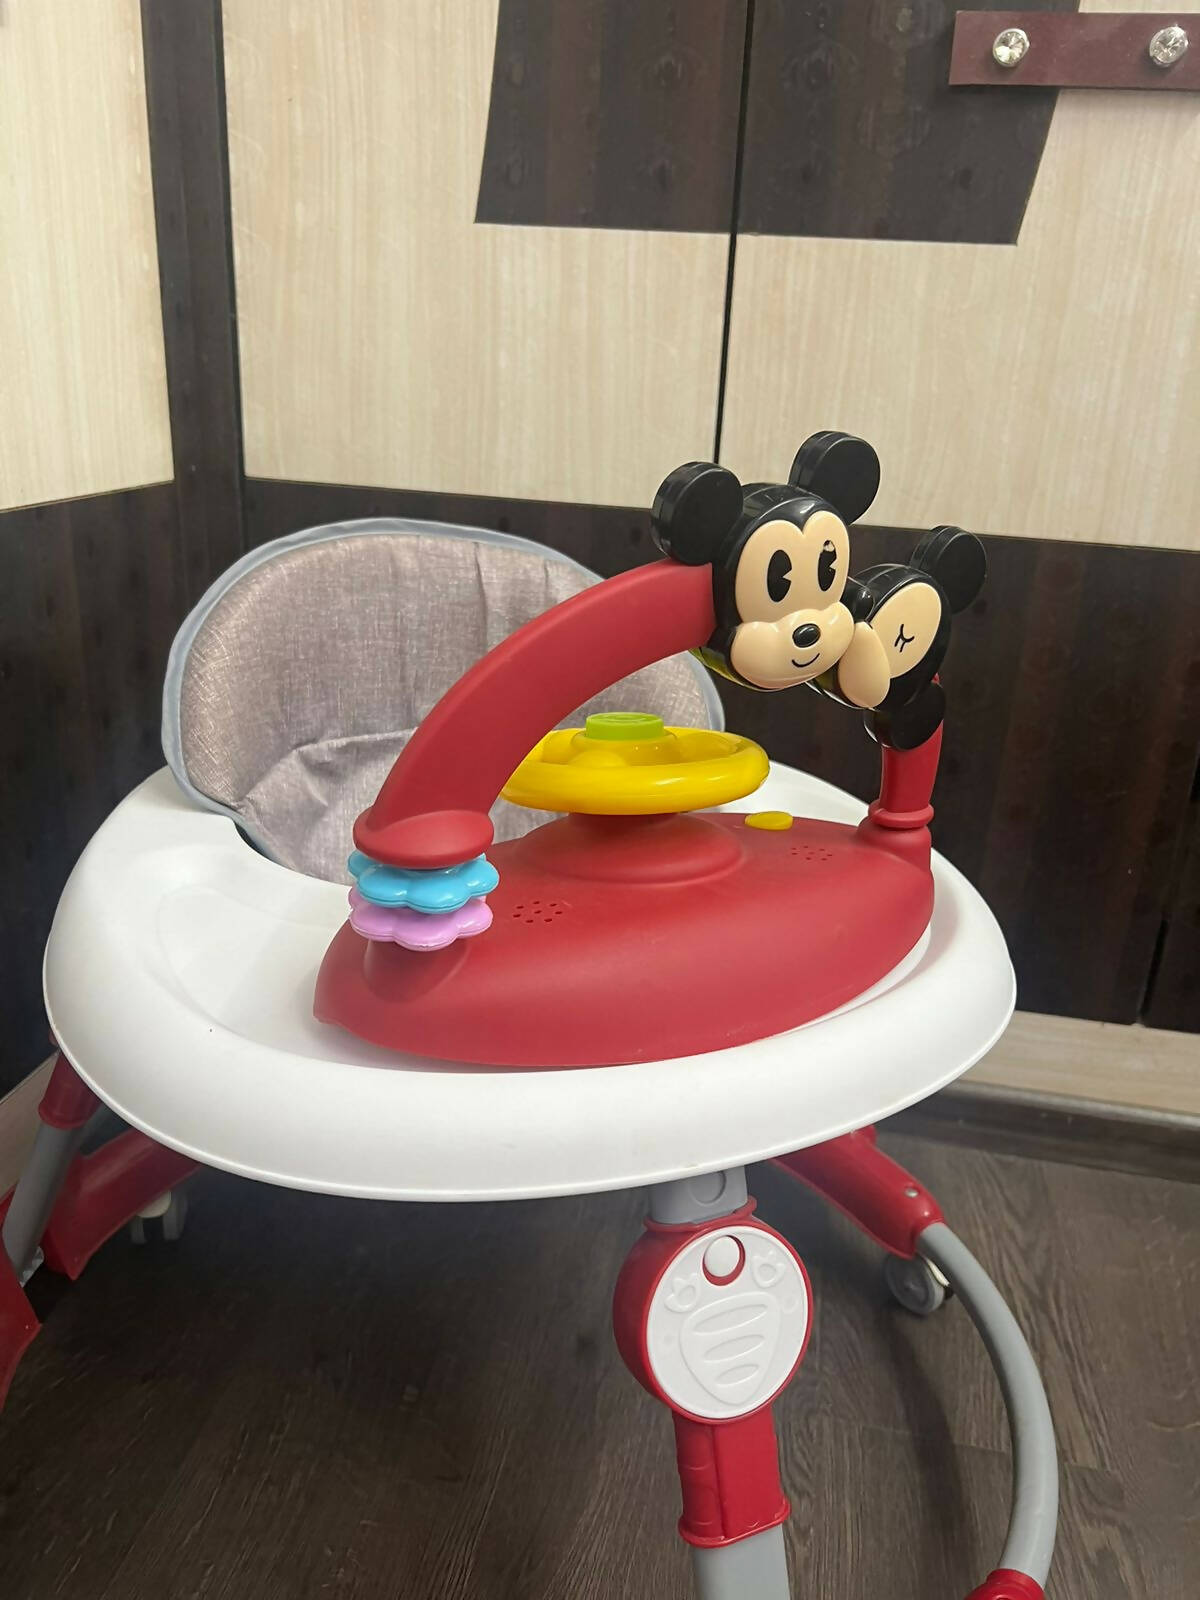 Step into the world of exploration and fun with our Beautiful Walker for Baby - the perfect companion for your little one's first steps!